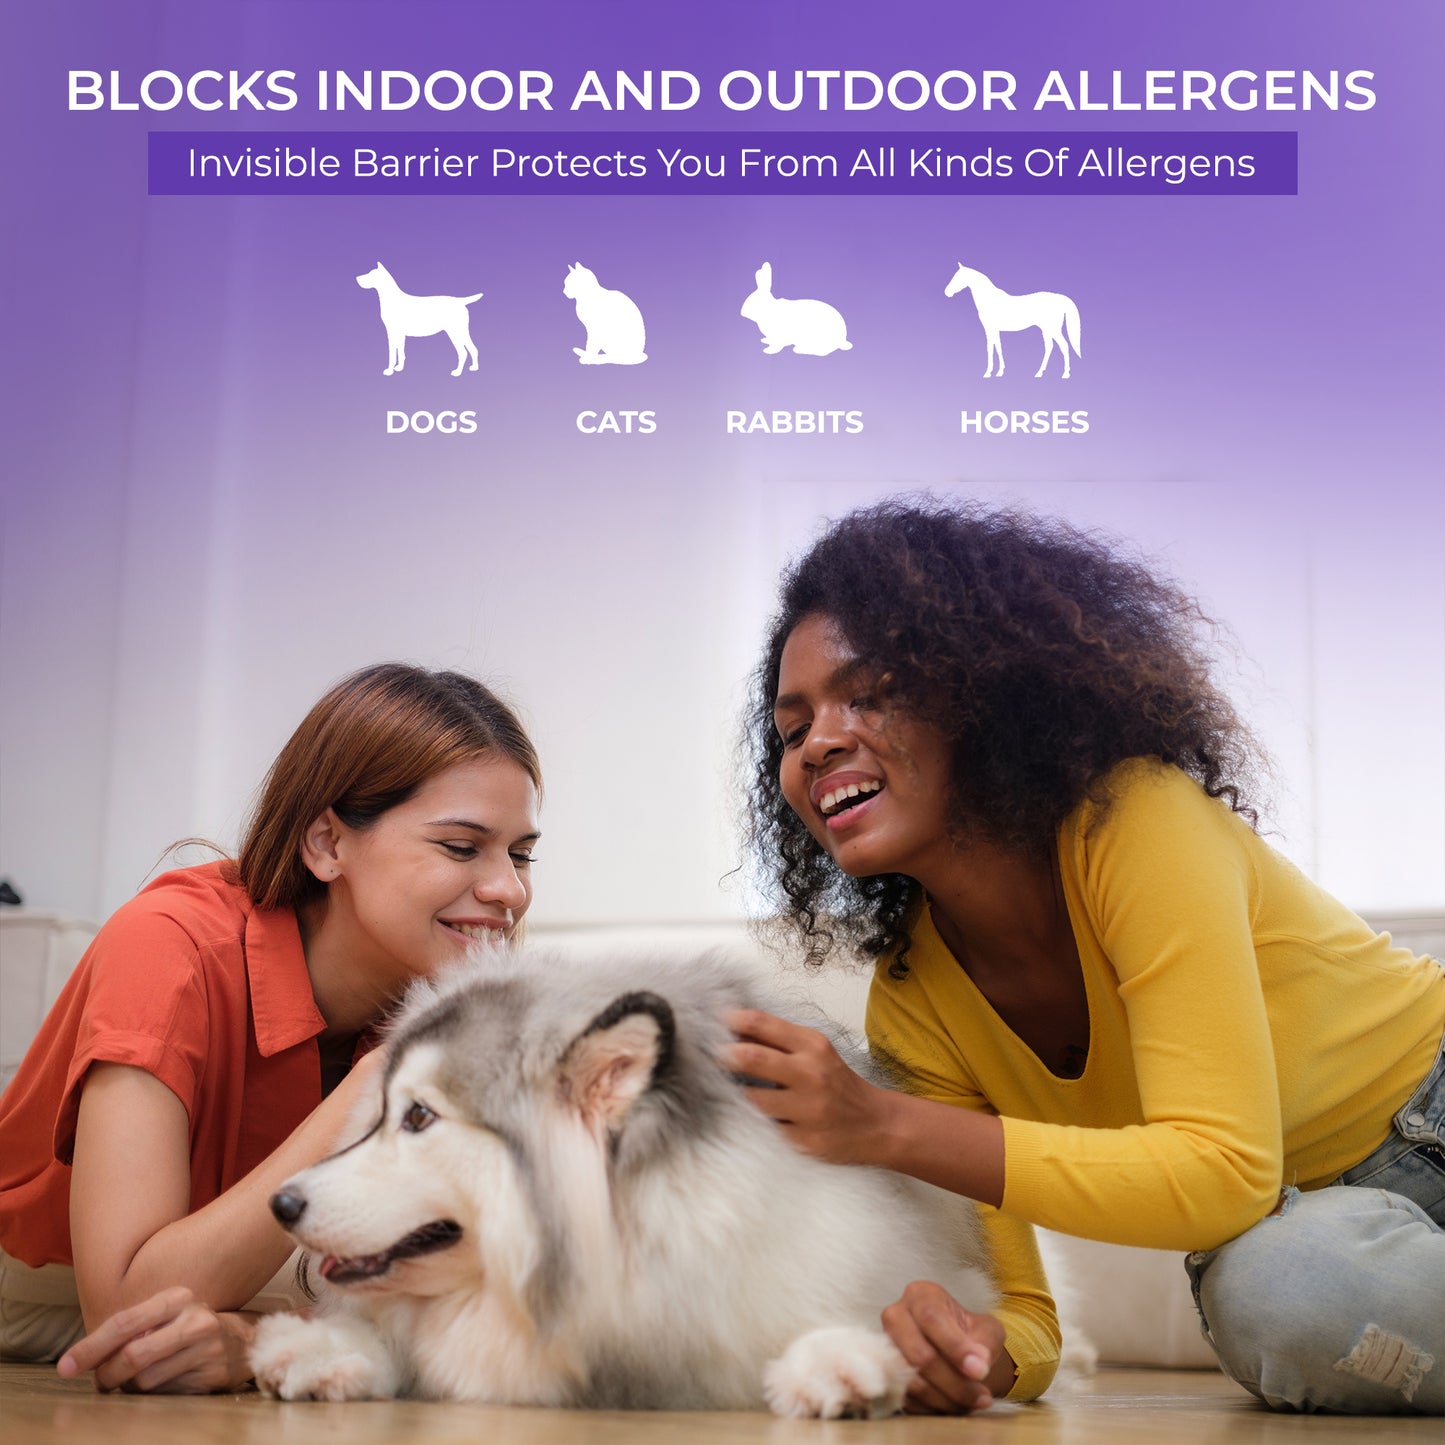 NasalGuard For Pet Lovers - Airborne Particle Blocker - 3g (Pack of 6)